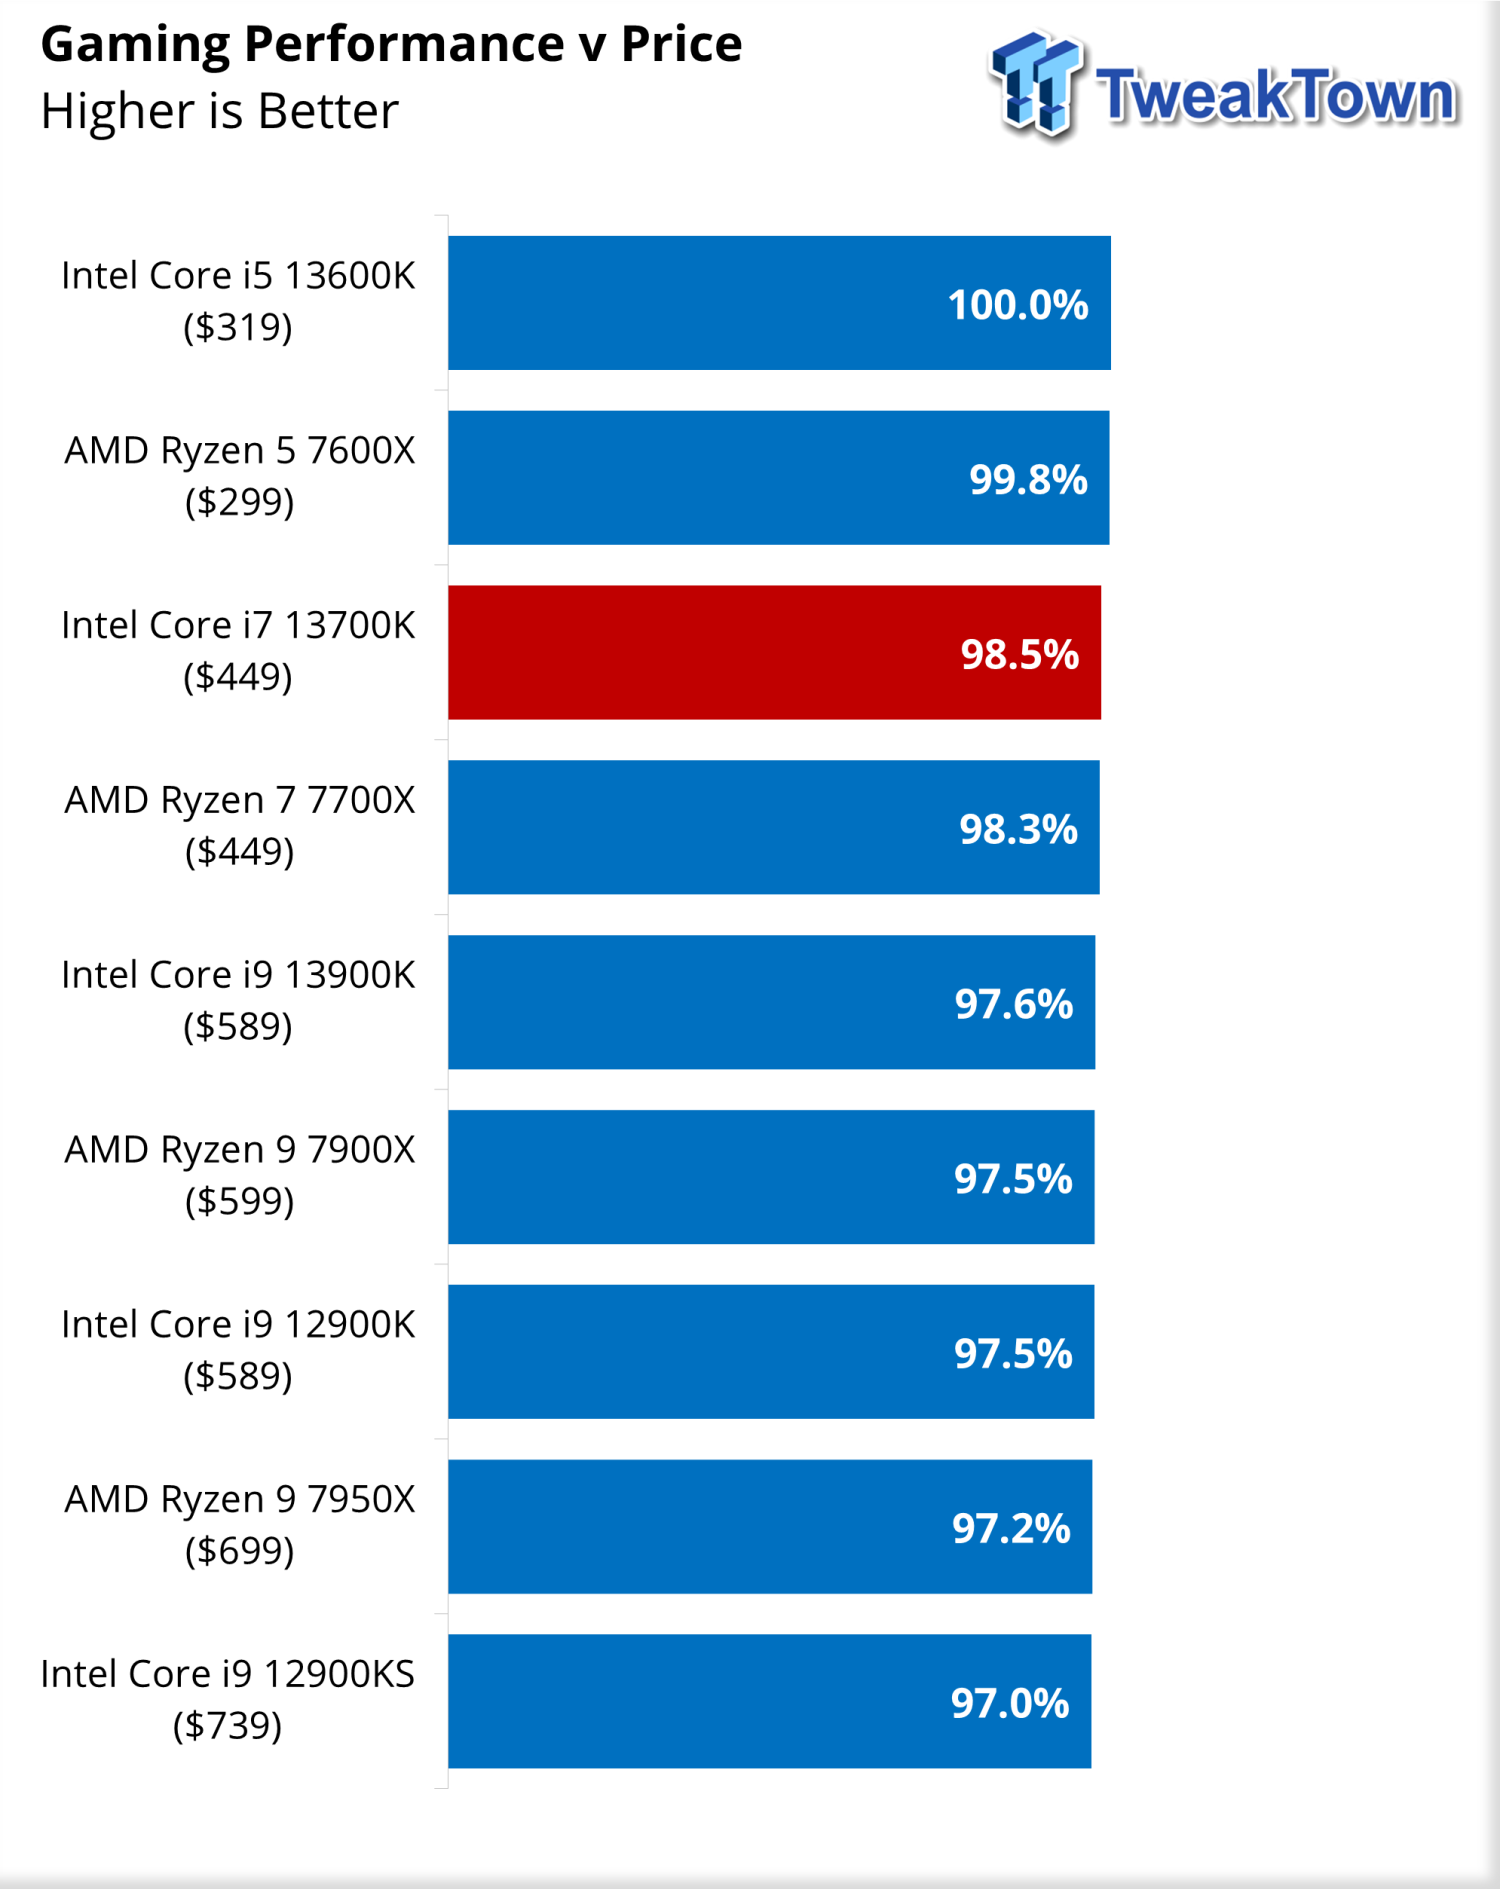 Intel Core i7-13700K and Core i5-13600K tested, higher performance with  higher power consumption 